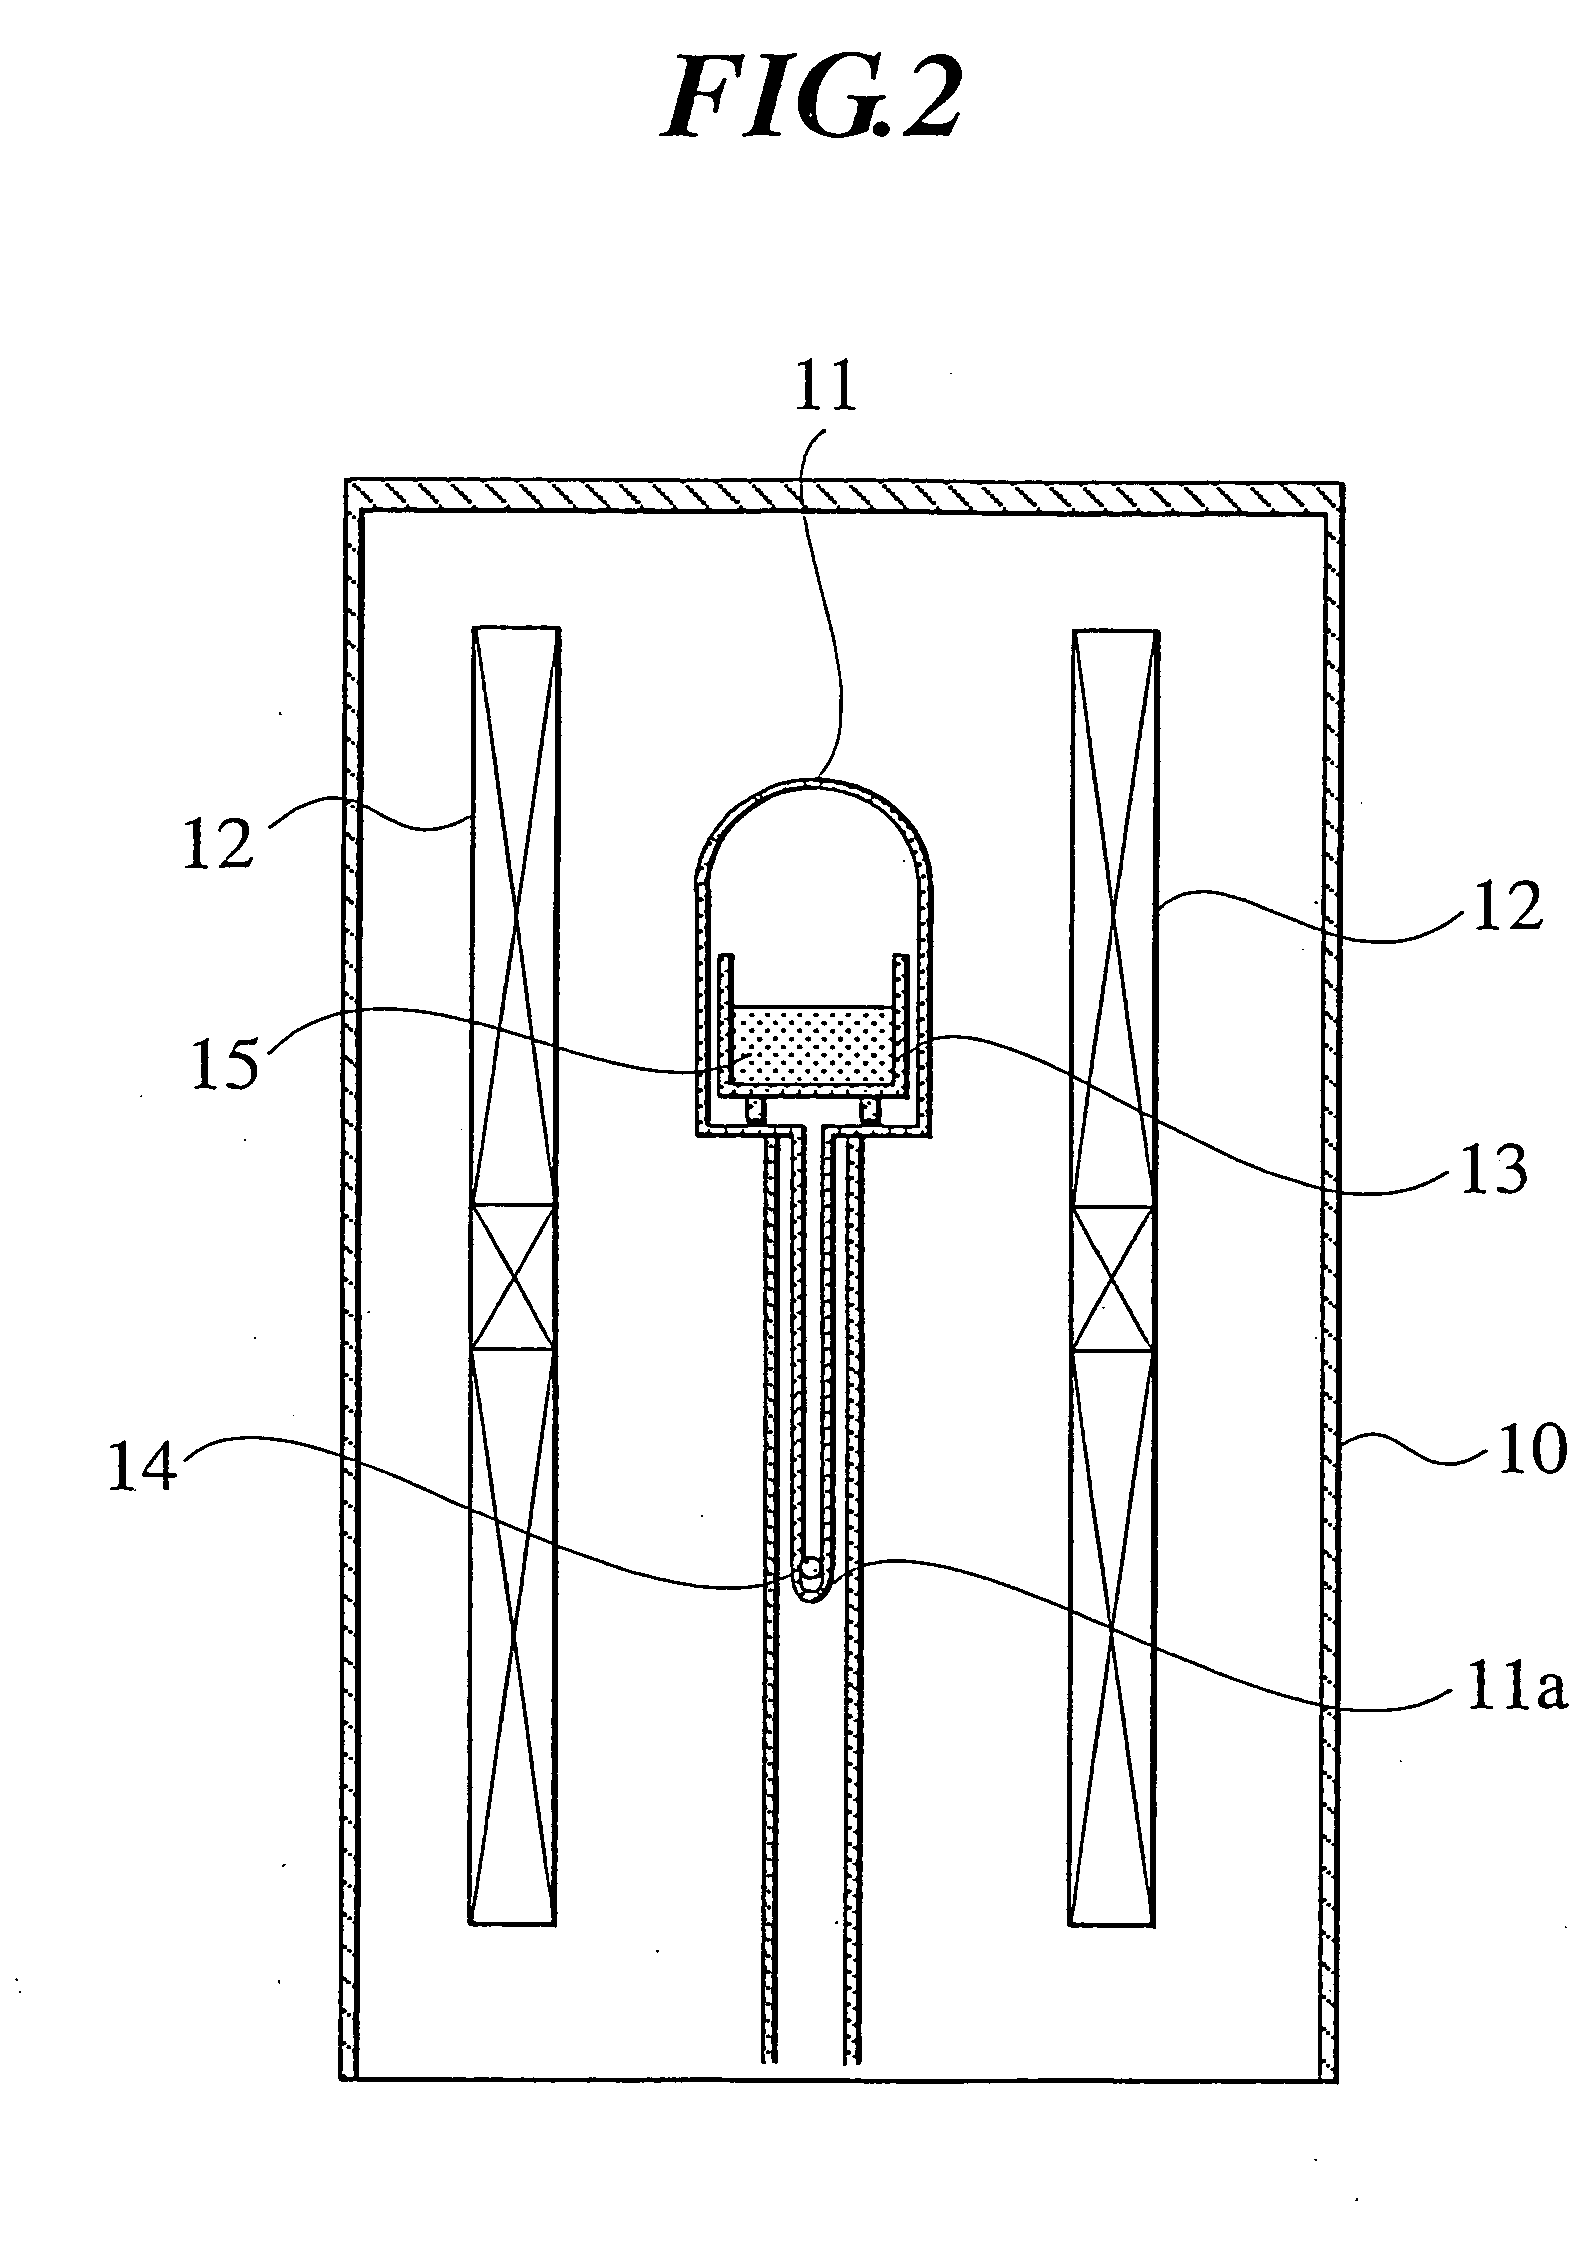 Cdte single crystal and cdte polycrystal, and method for preparation thereof